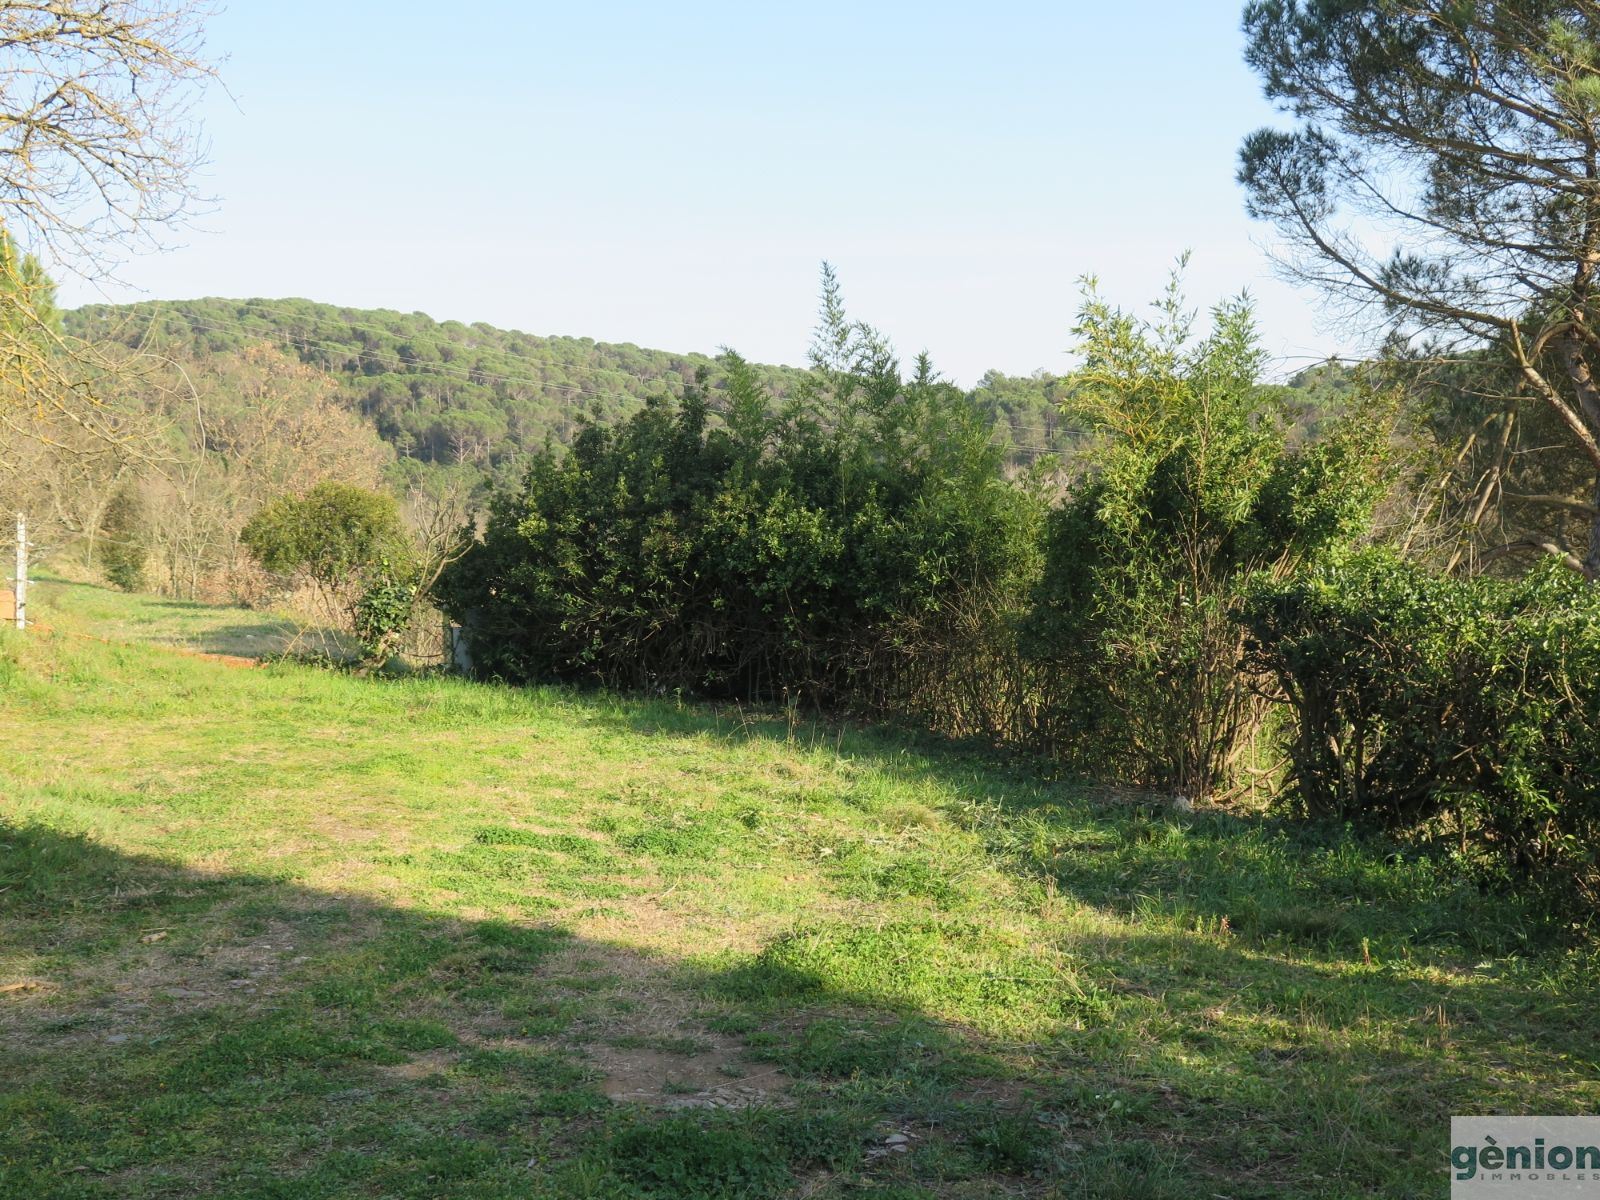 FARMHOUSE IN QUART, NEXT TO GIRONA. LIVING AREA OF 265 M² ON A 7,000 M² PLOT